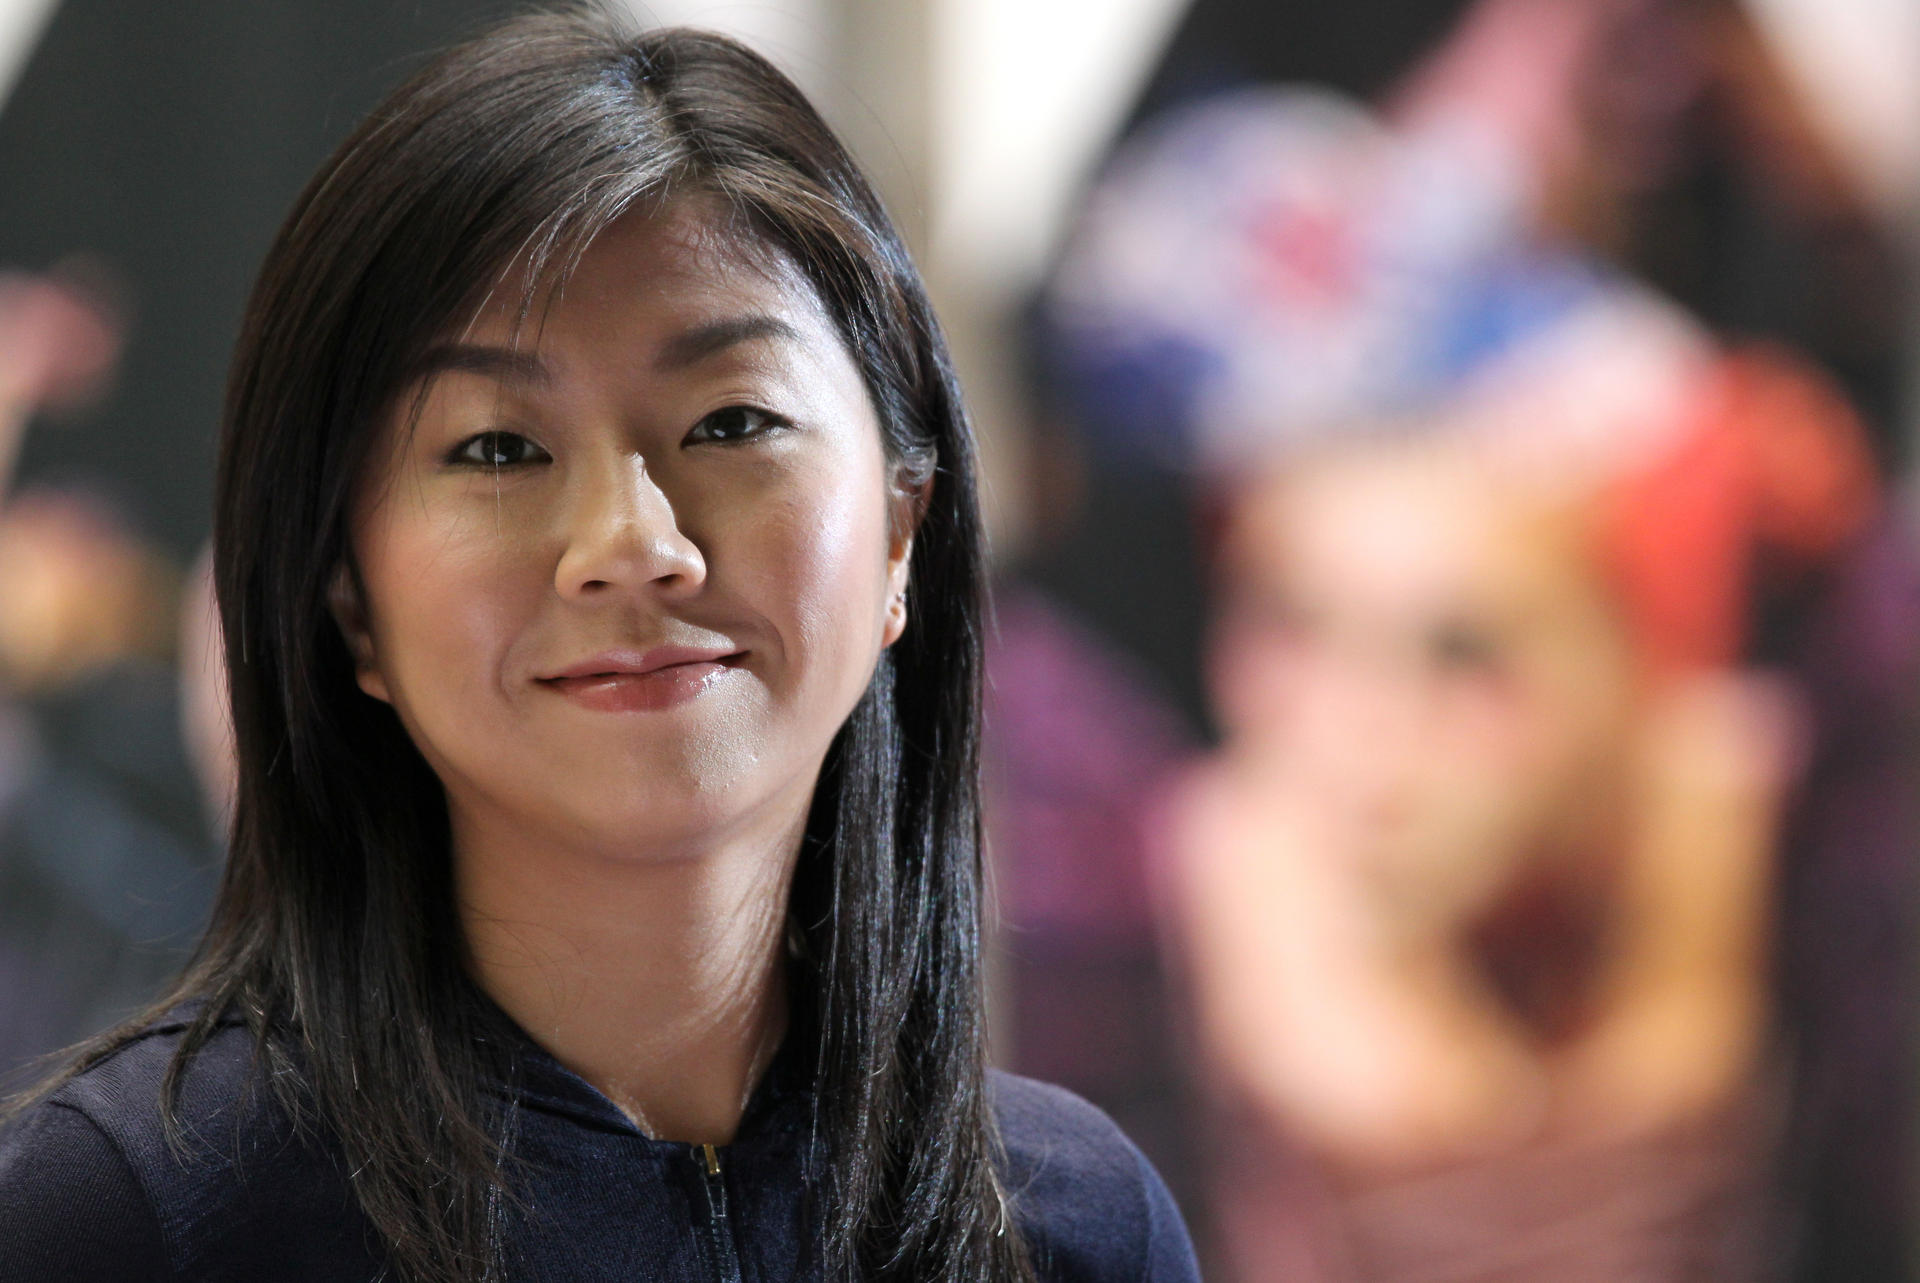 Candace Chong is a four-time best-script winner of the Hong Kong Drama Awards